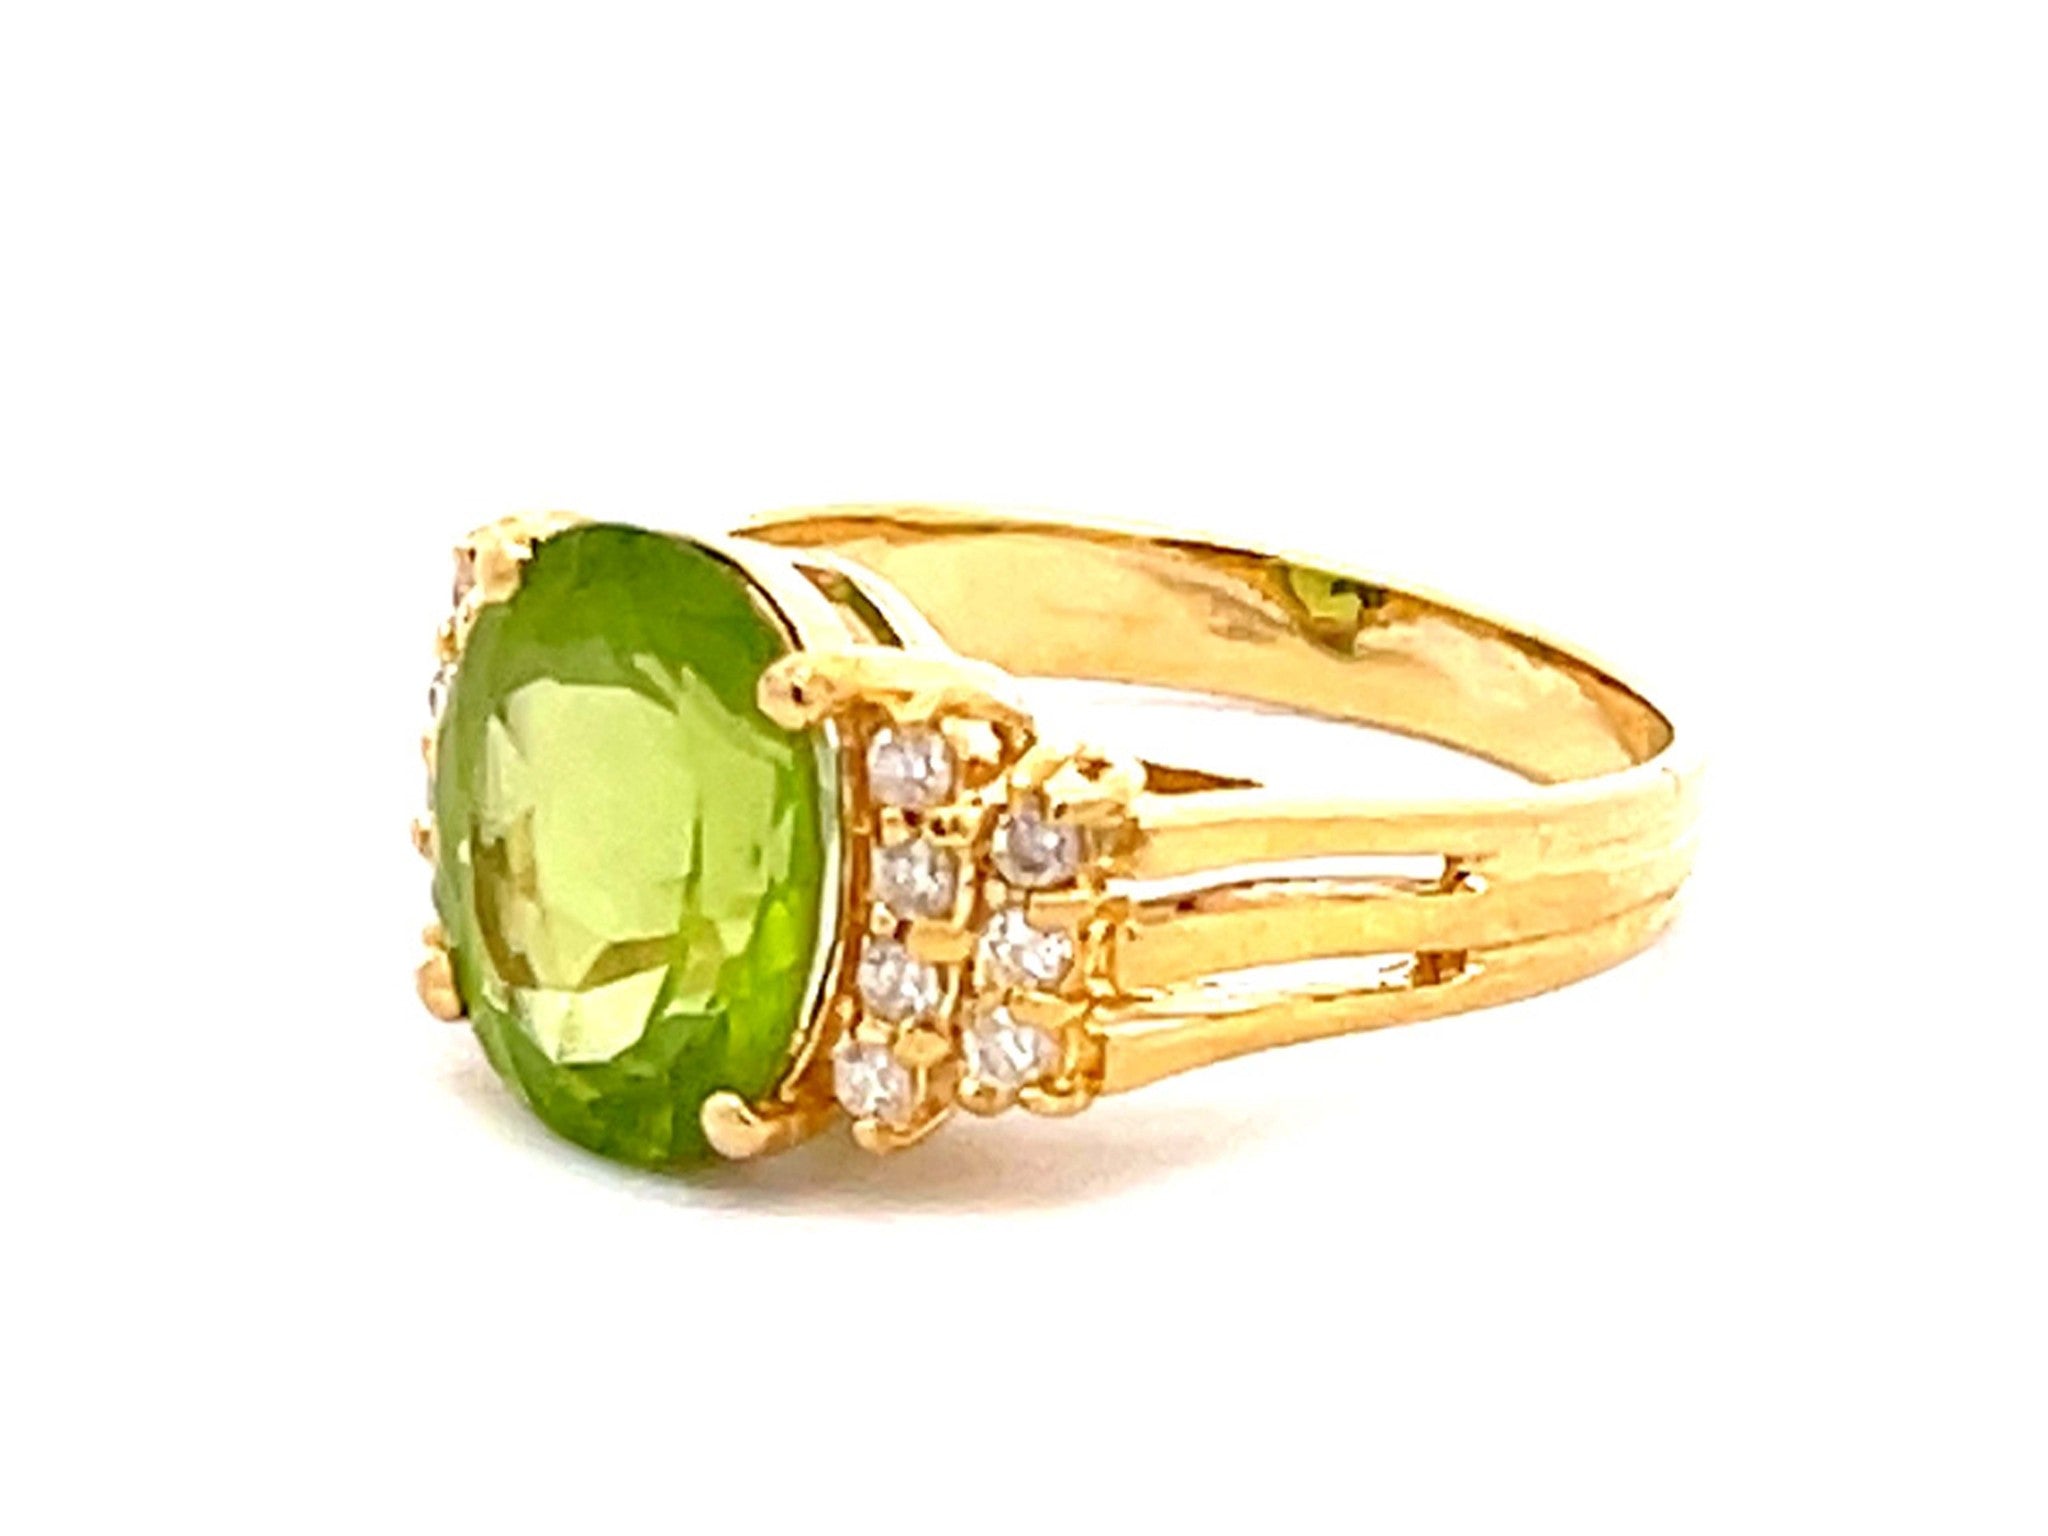 Vintage Peridot and Diamond Ring in 18k Yellow Gold